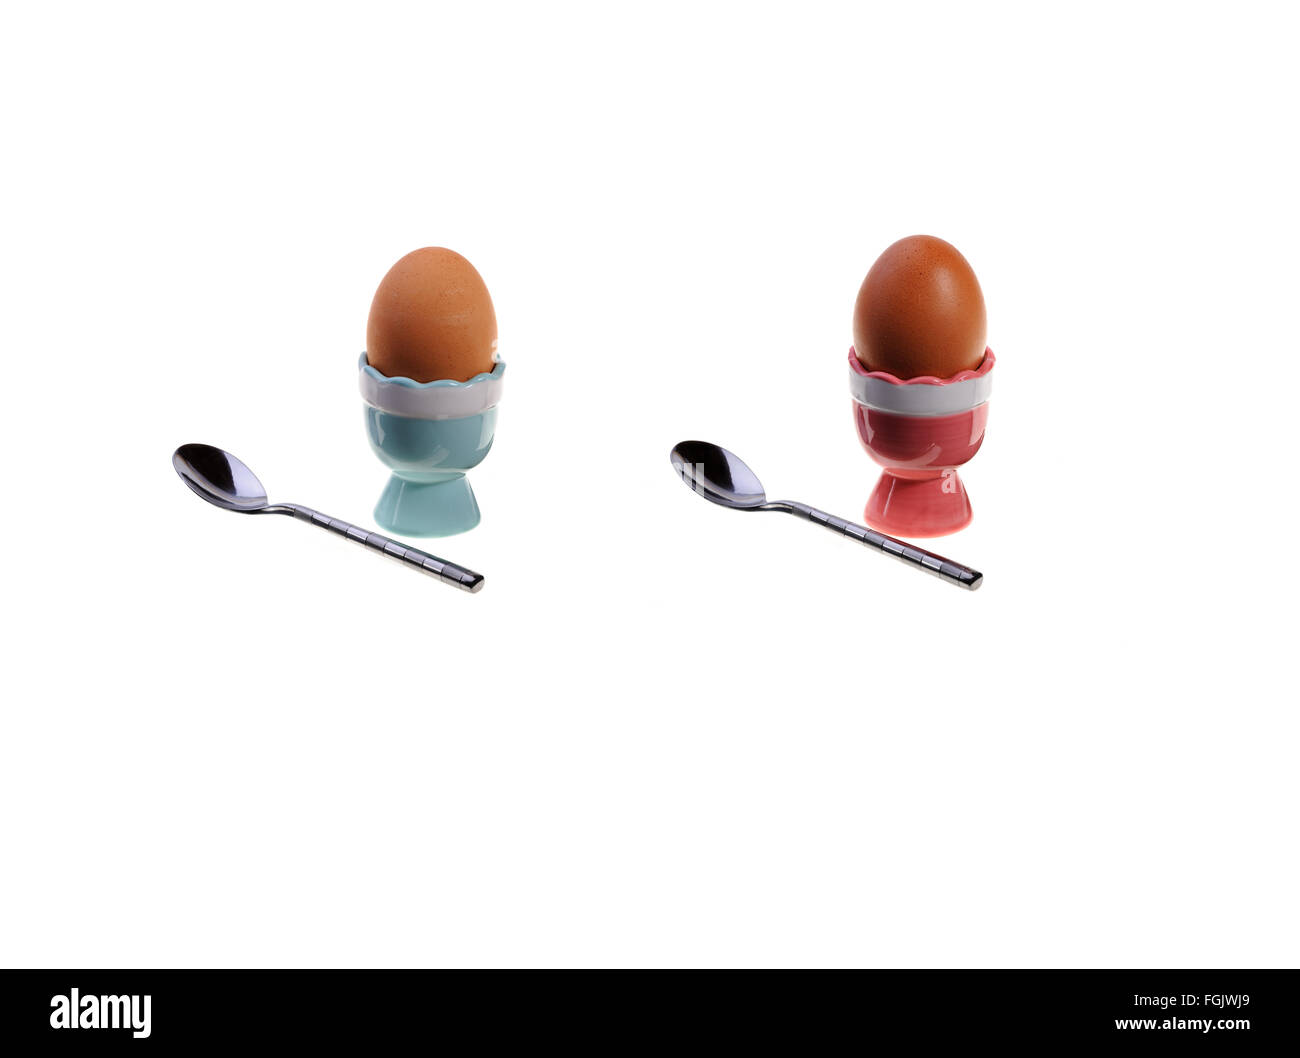 Two egg cups, eggs and spoons. Stock Photo